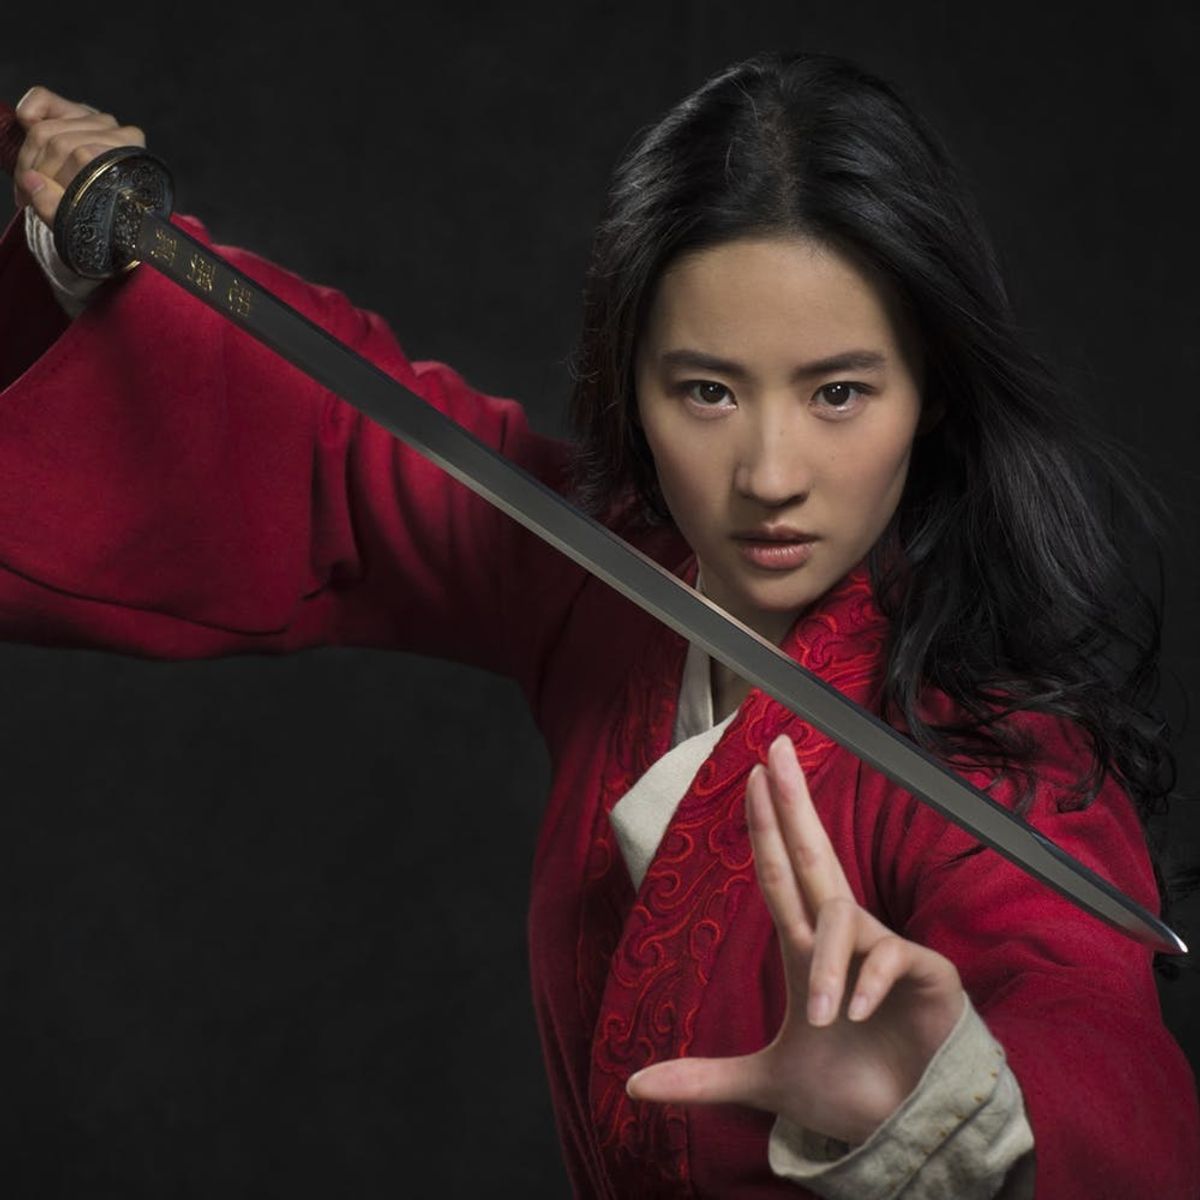 See the First Photo of Liu Yifei in Disney’s Live-Action ‘Mulan’ Movie